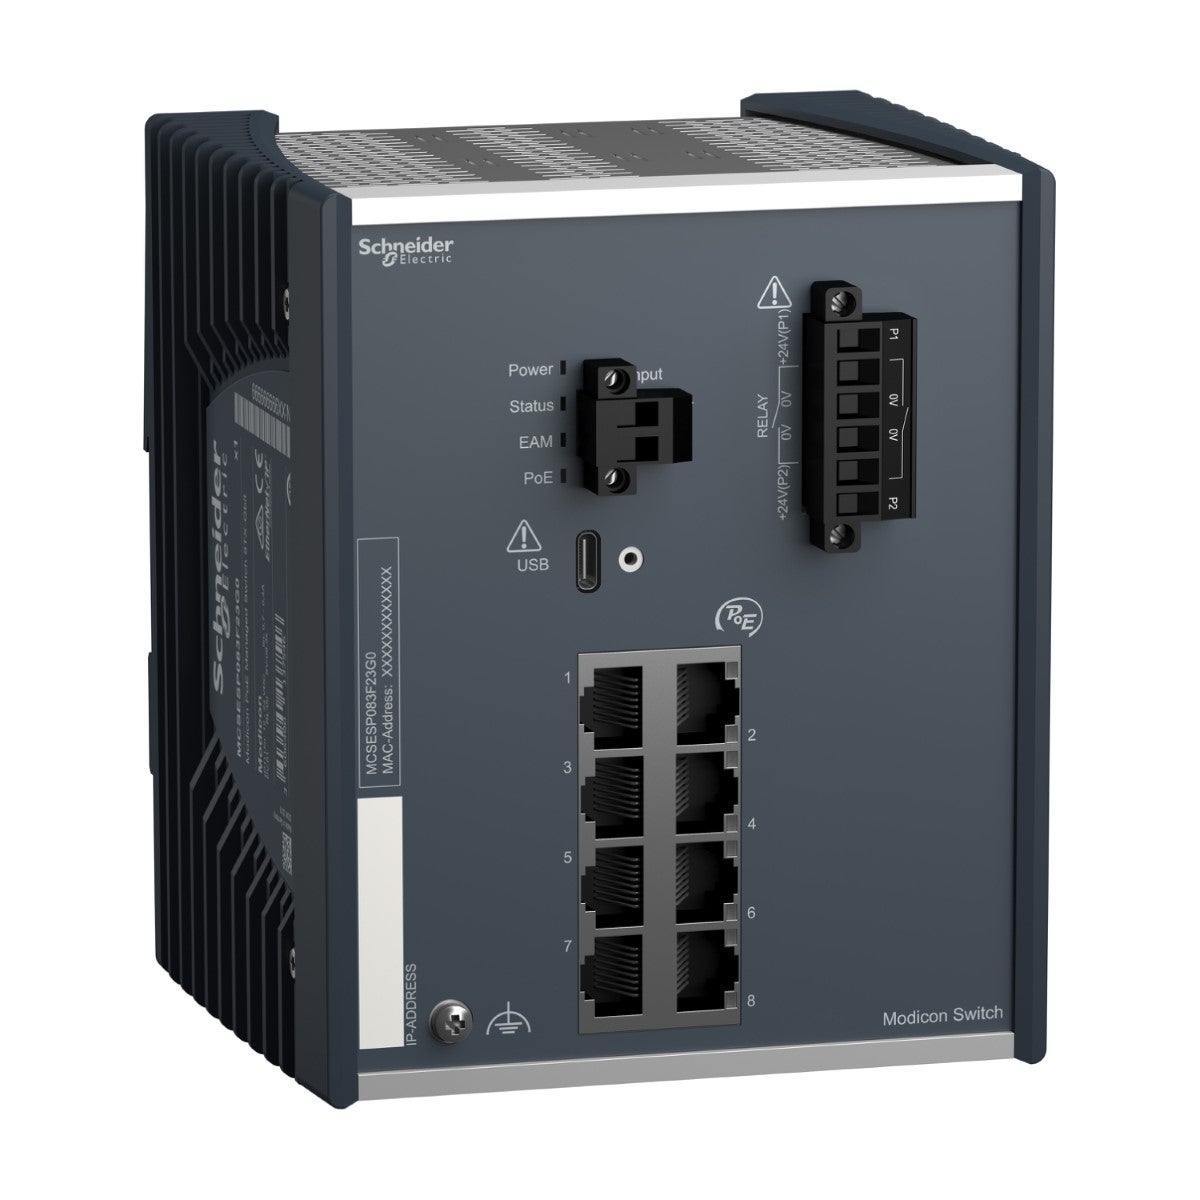 network switch, Modicon Networking, PoE power over Ethernet, managed, 8Gigabit ports for copper